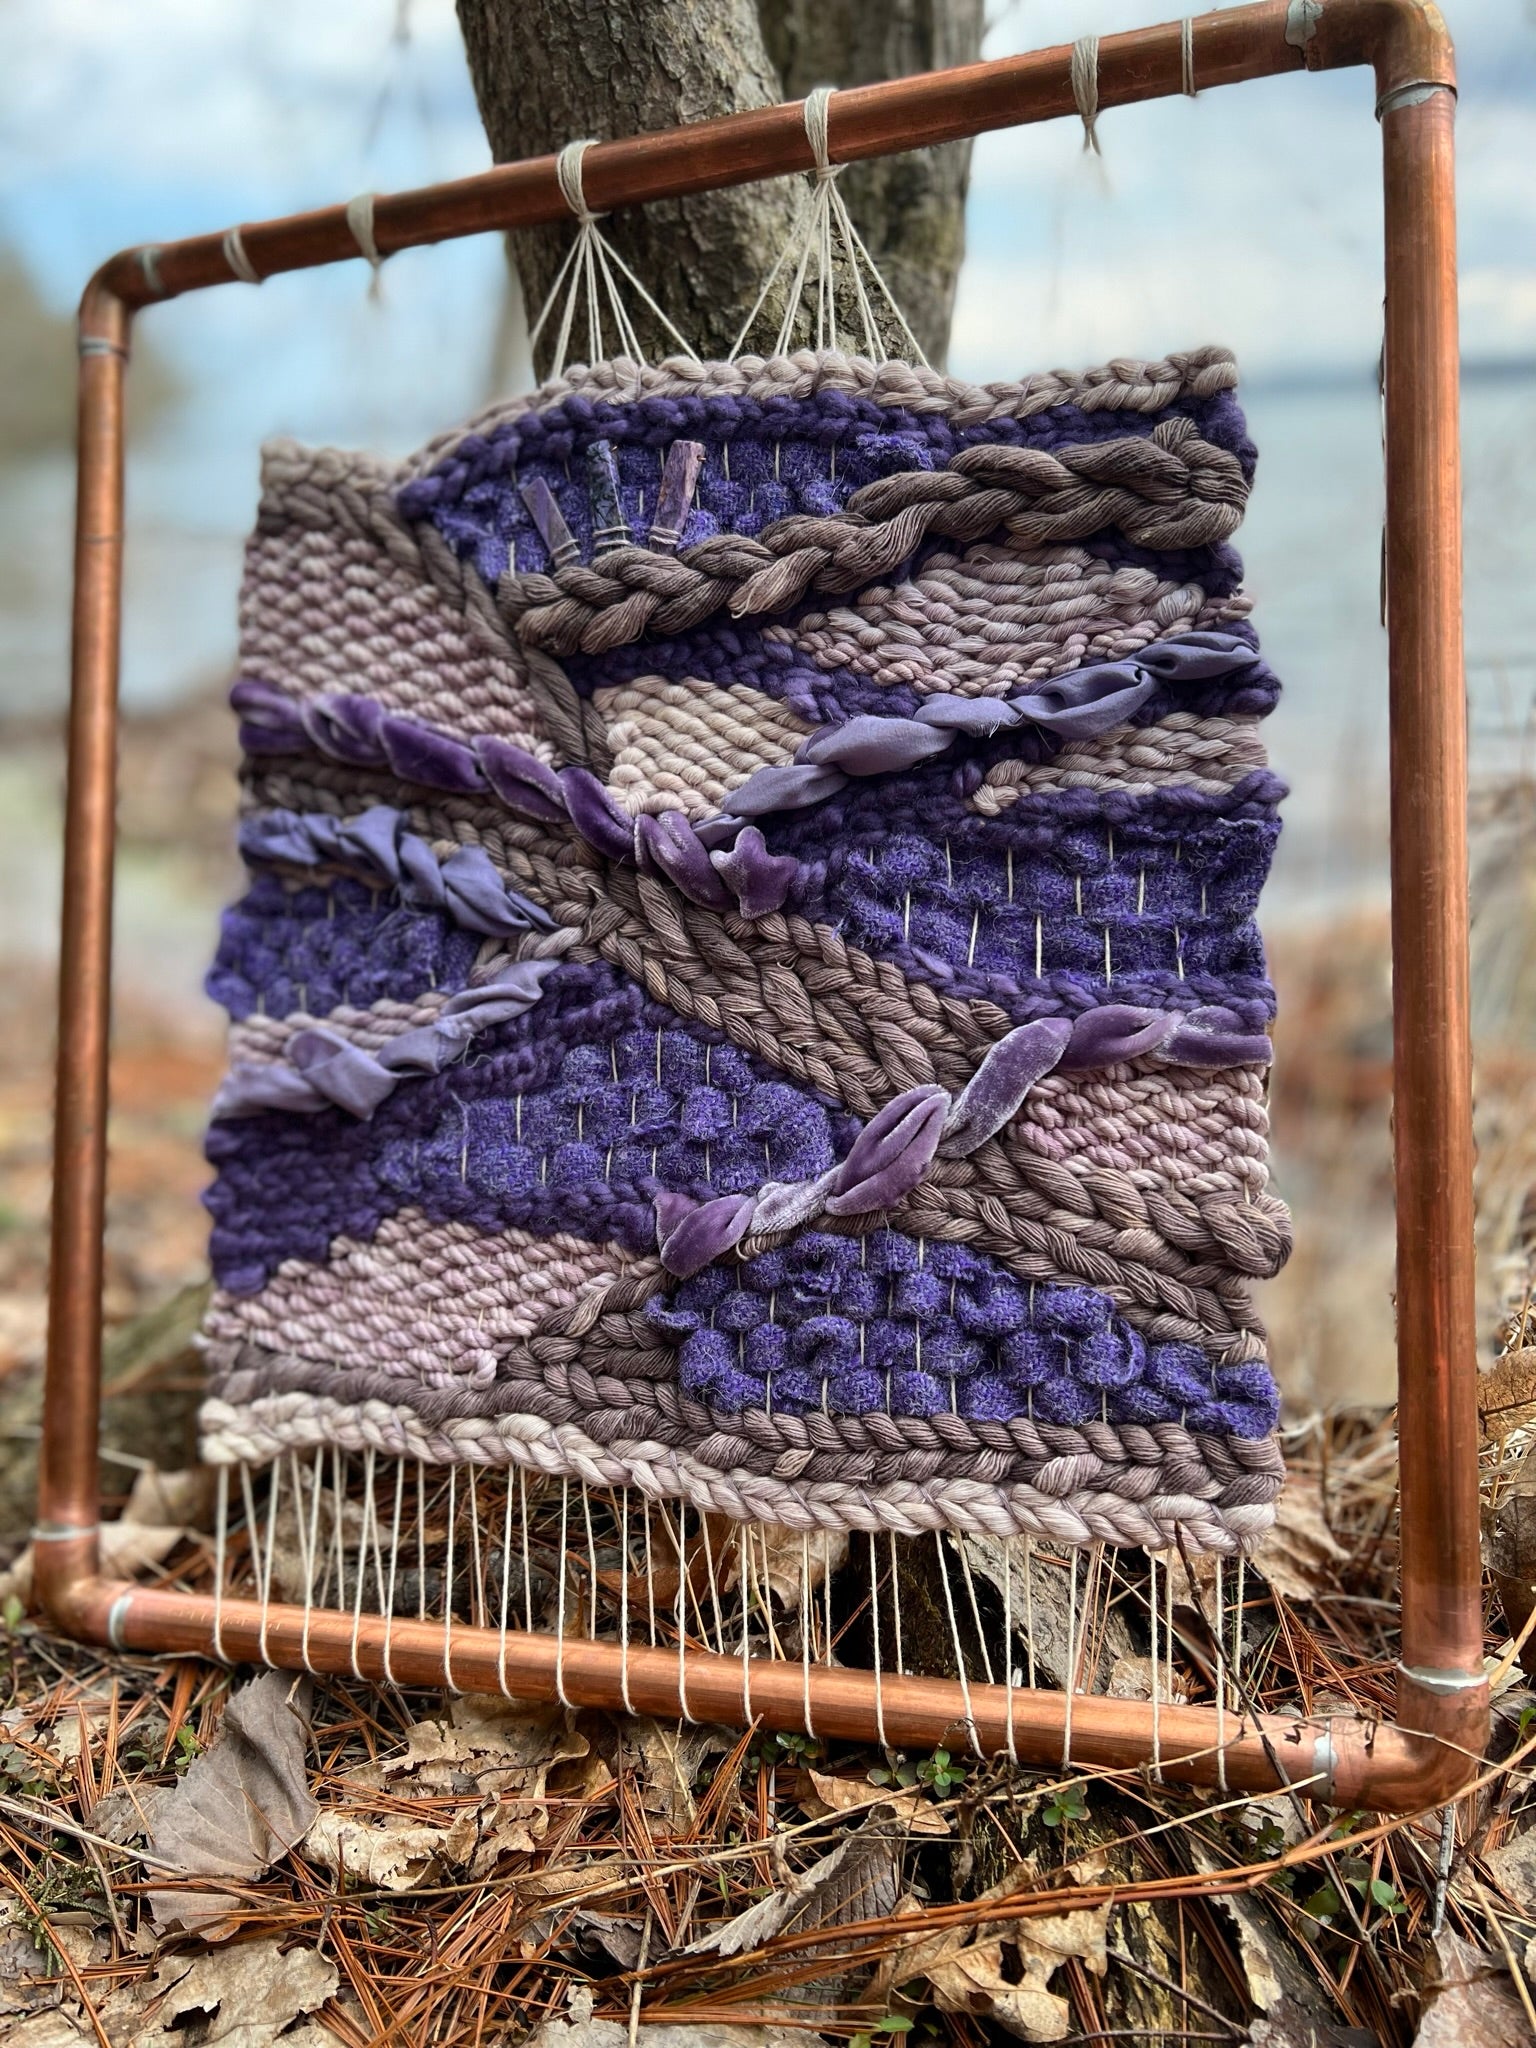 Naturally Dyed Woven Wall Hanging Tapestry Harris Tweed with Charoite Crystals Hand cut SIlk and Velvet Cotton Wool Ancient Purple Logwood Dye and Black Currant and Blueberries with Copper Frame 